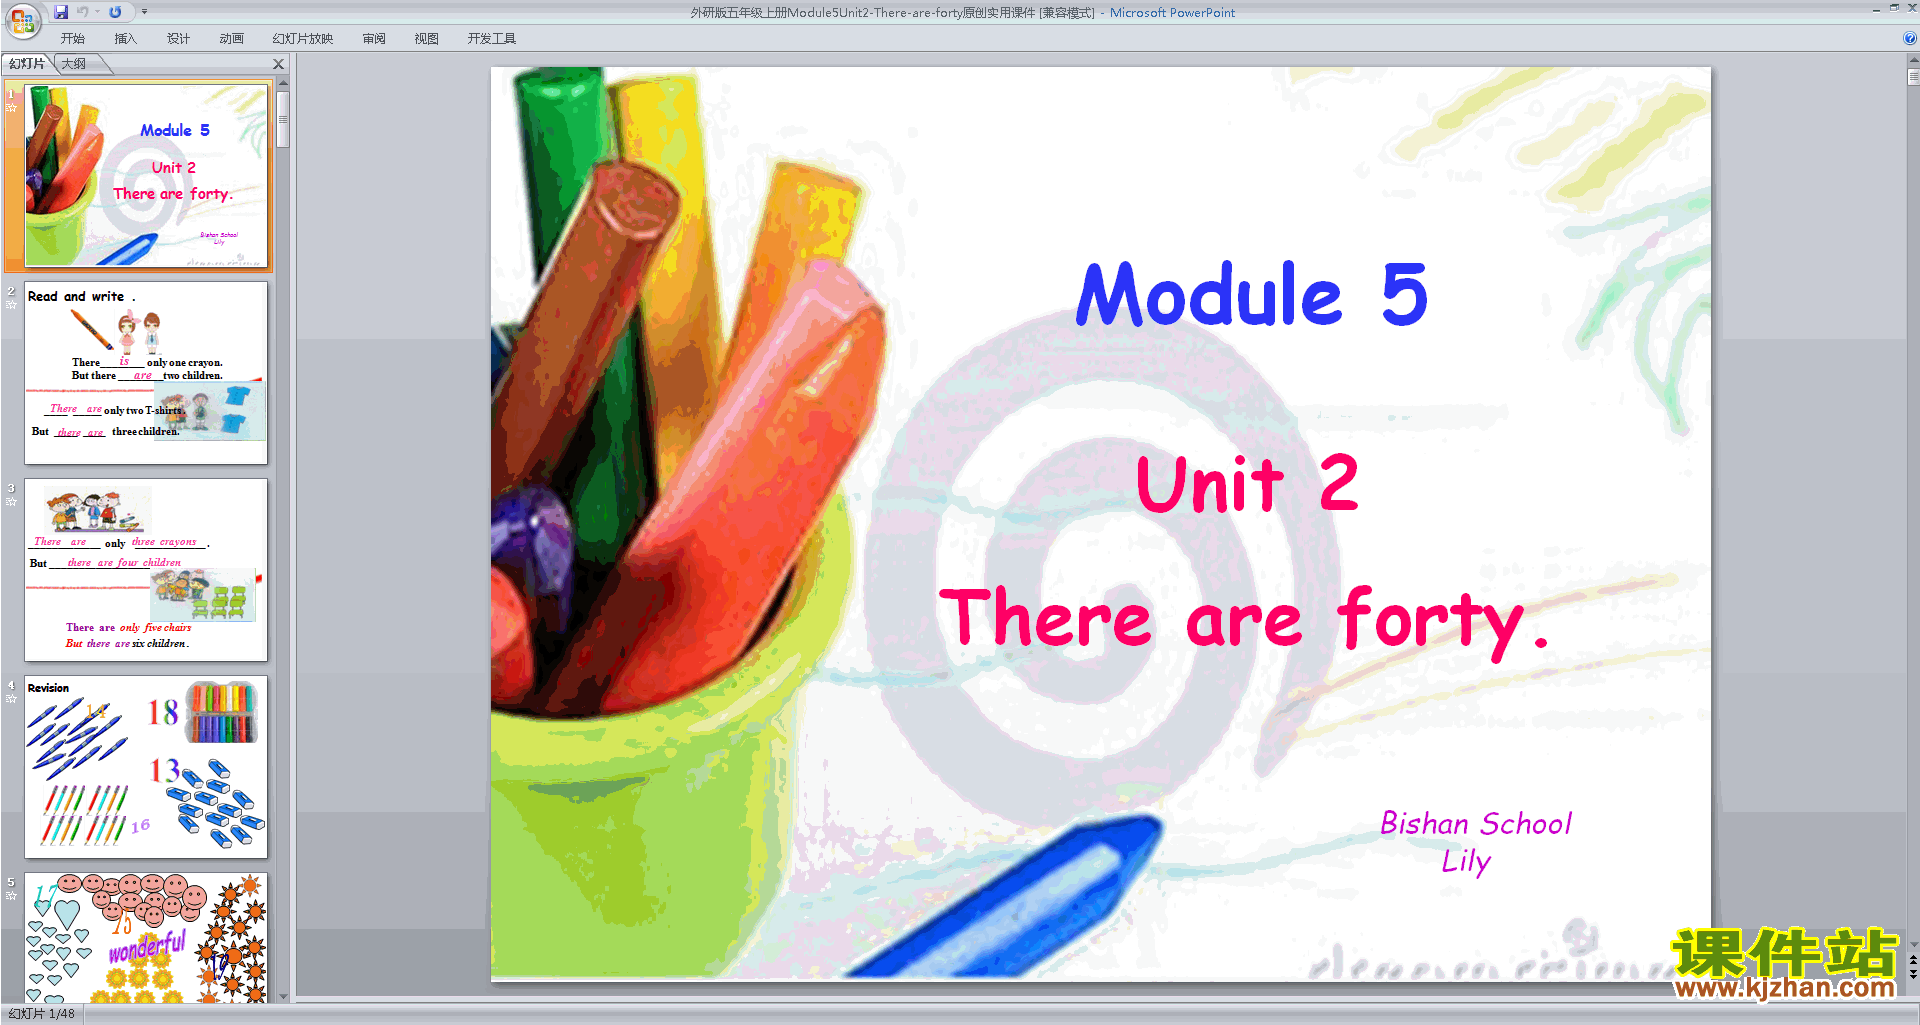 аModule5 Unit2 There are fortypptμ7